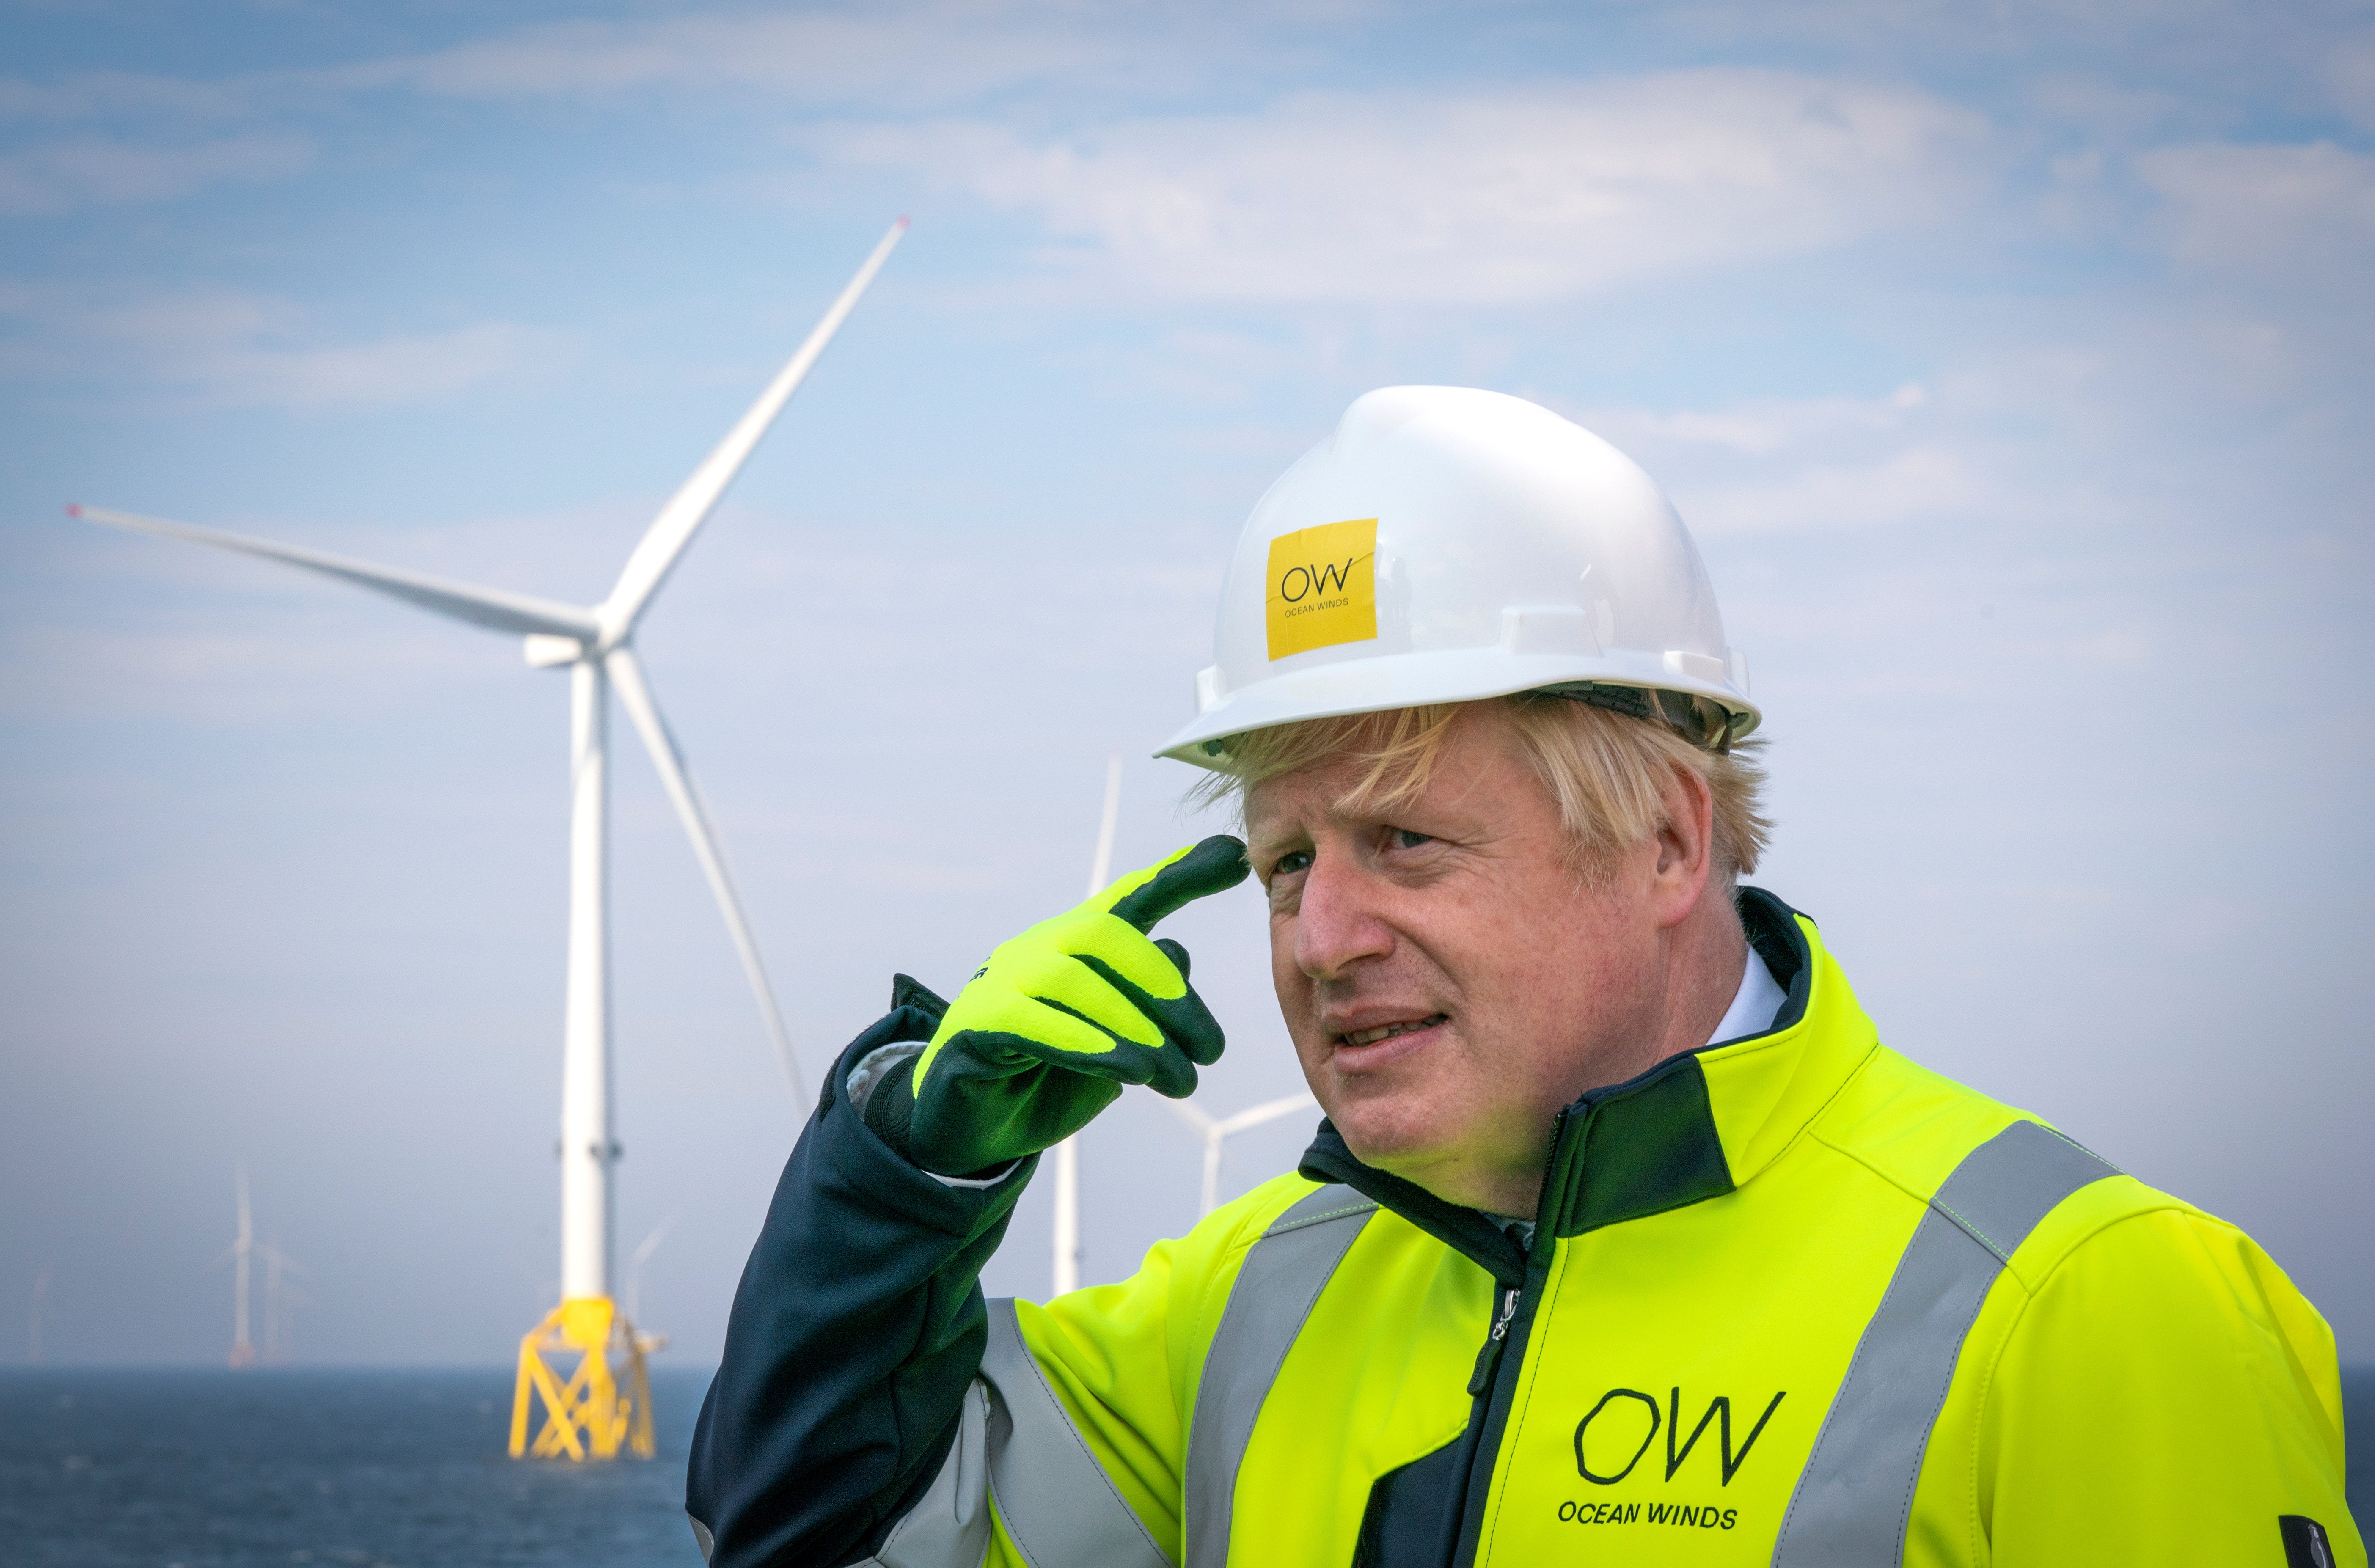 Boris Johnson once famously said wind turbines couldn’t ‘pull the skin off a rice pudding’, but he is now a major proponent of renewable energy